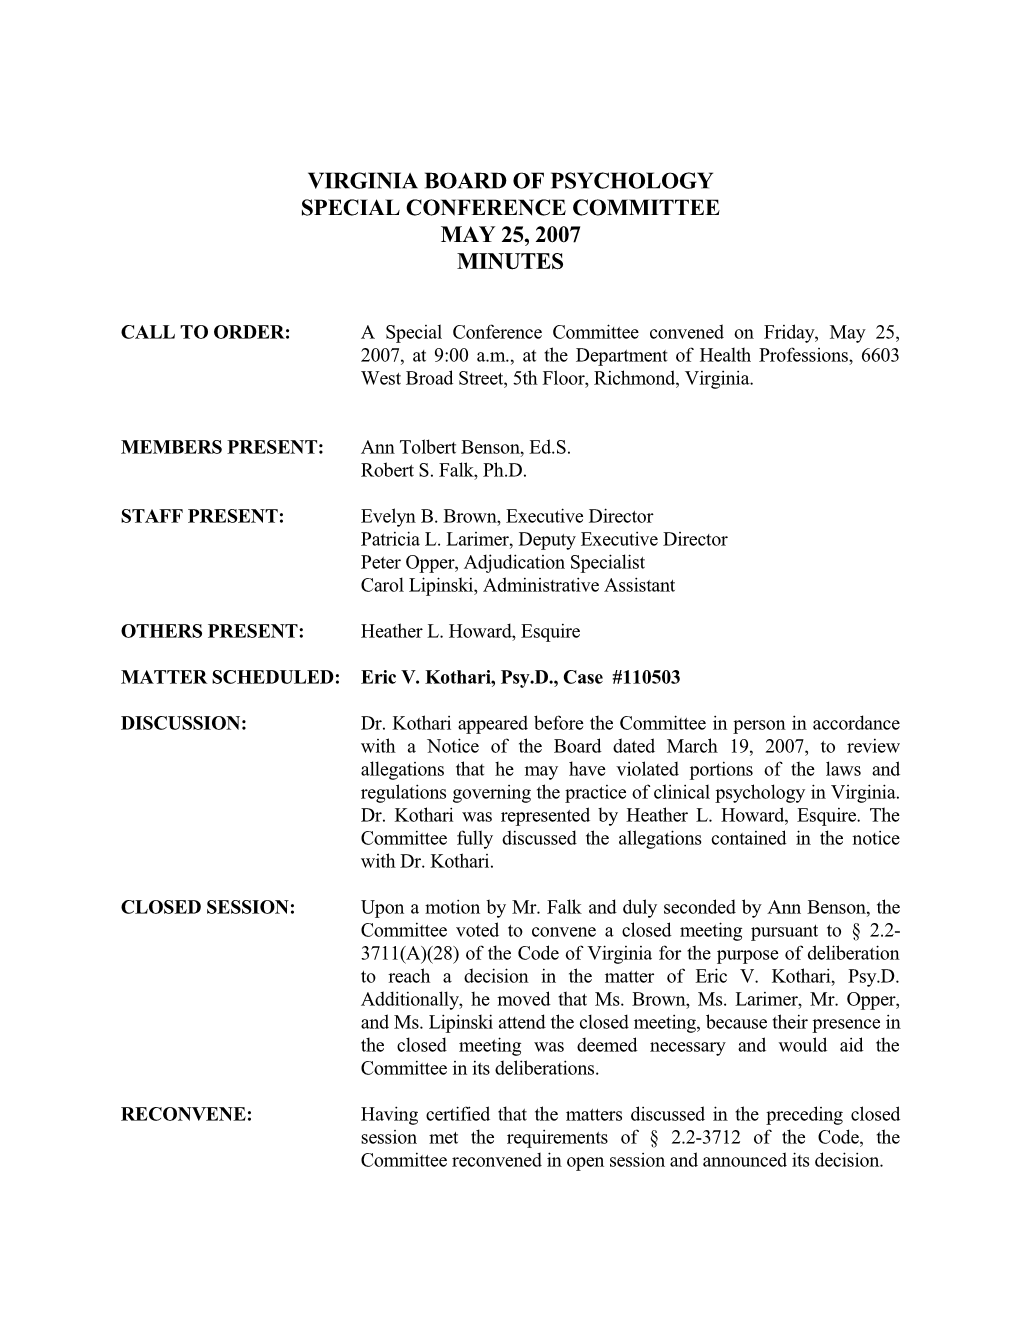 Psychology-Special Conference Committee Minutes for May 25, 2007